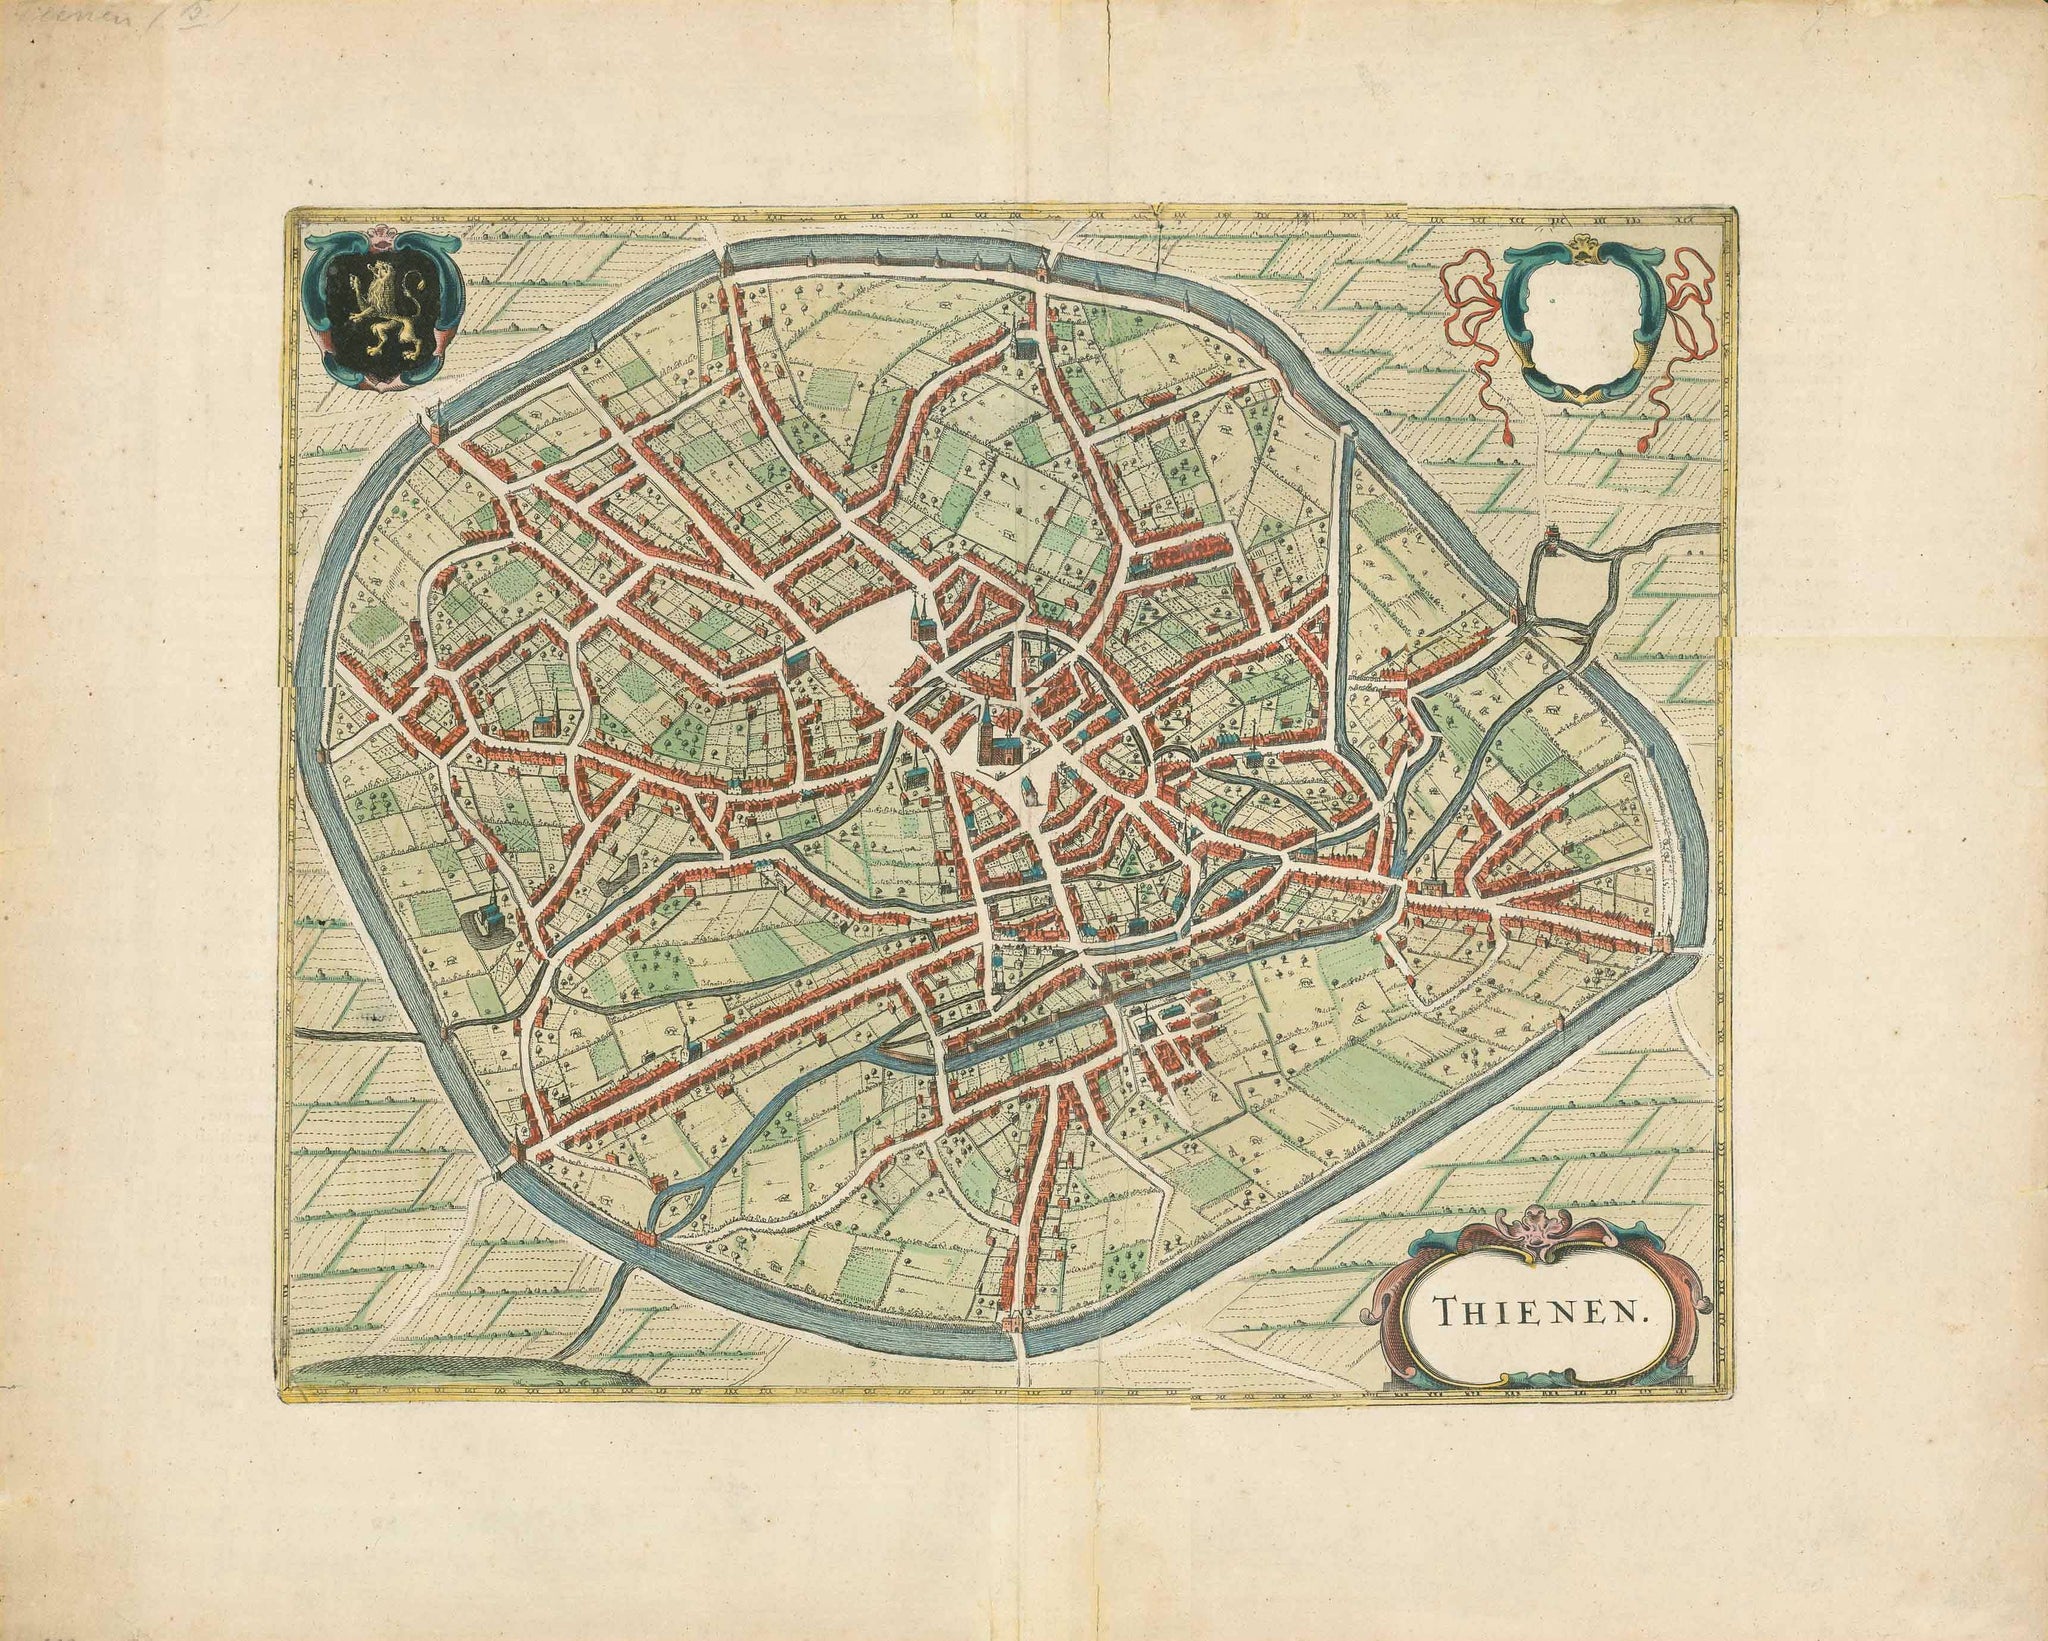 Tienen, Brabant (Belgium). - "Thienen"  Bird's Eye view of  Tienen, South-Belgian City in Brabant,  Reverse side: Description in Latin  Copper etching with original hand coloring.  Published in "Staedtebuch" by Johannes Janssonius (1588-1664)  Amsterdam, 1657  Janssonius had bought the  copper plates for printing  from the heir of "Civitates Orbis Terrarum" , Original antique print  